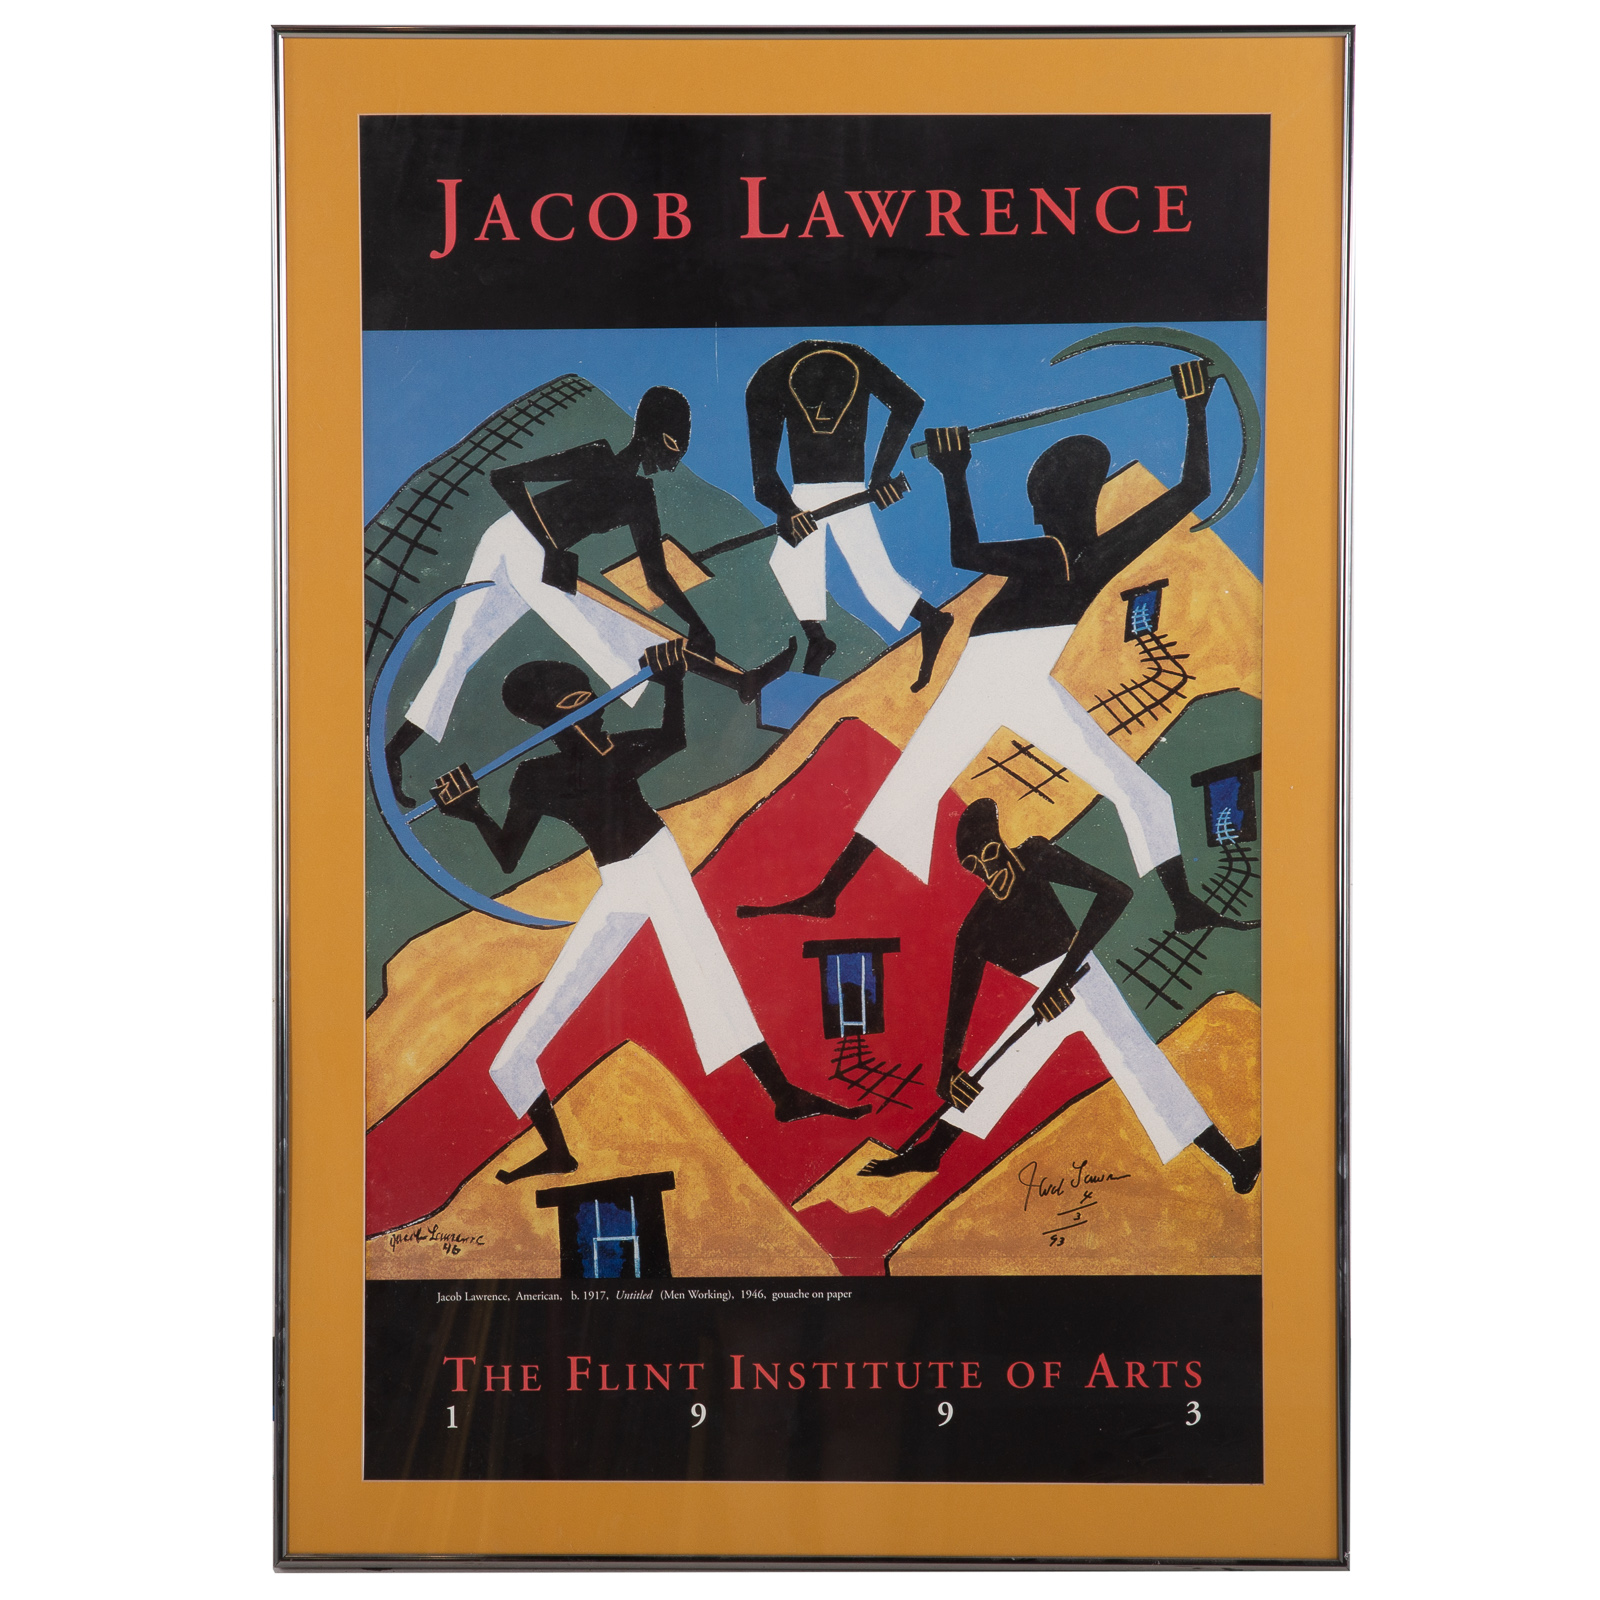 JACOB LAWRENCE. HAND SIGNED EXHIBITION